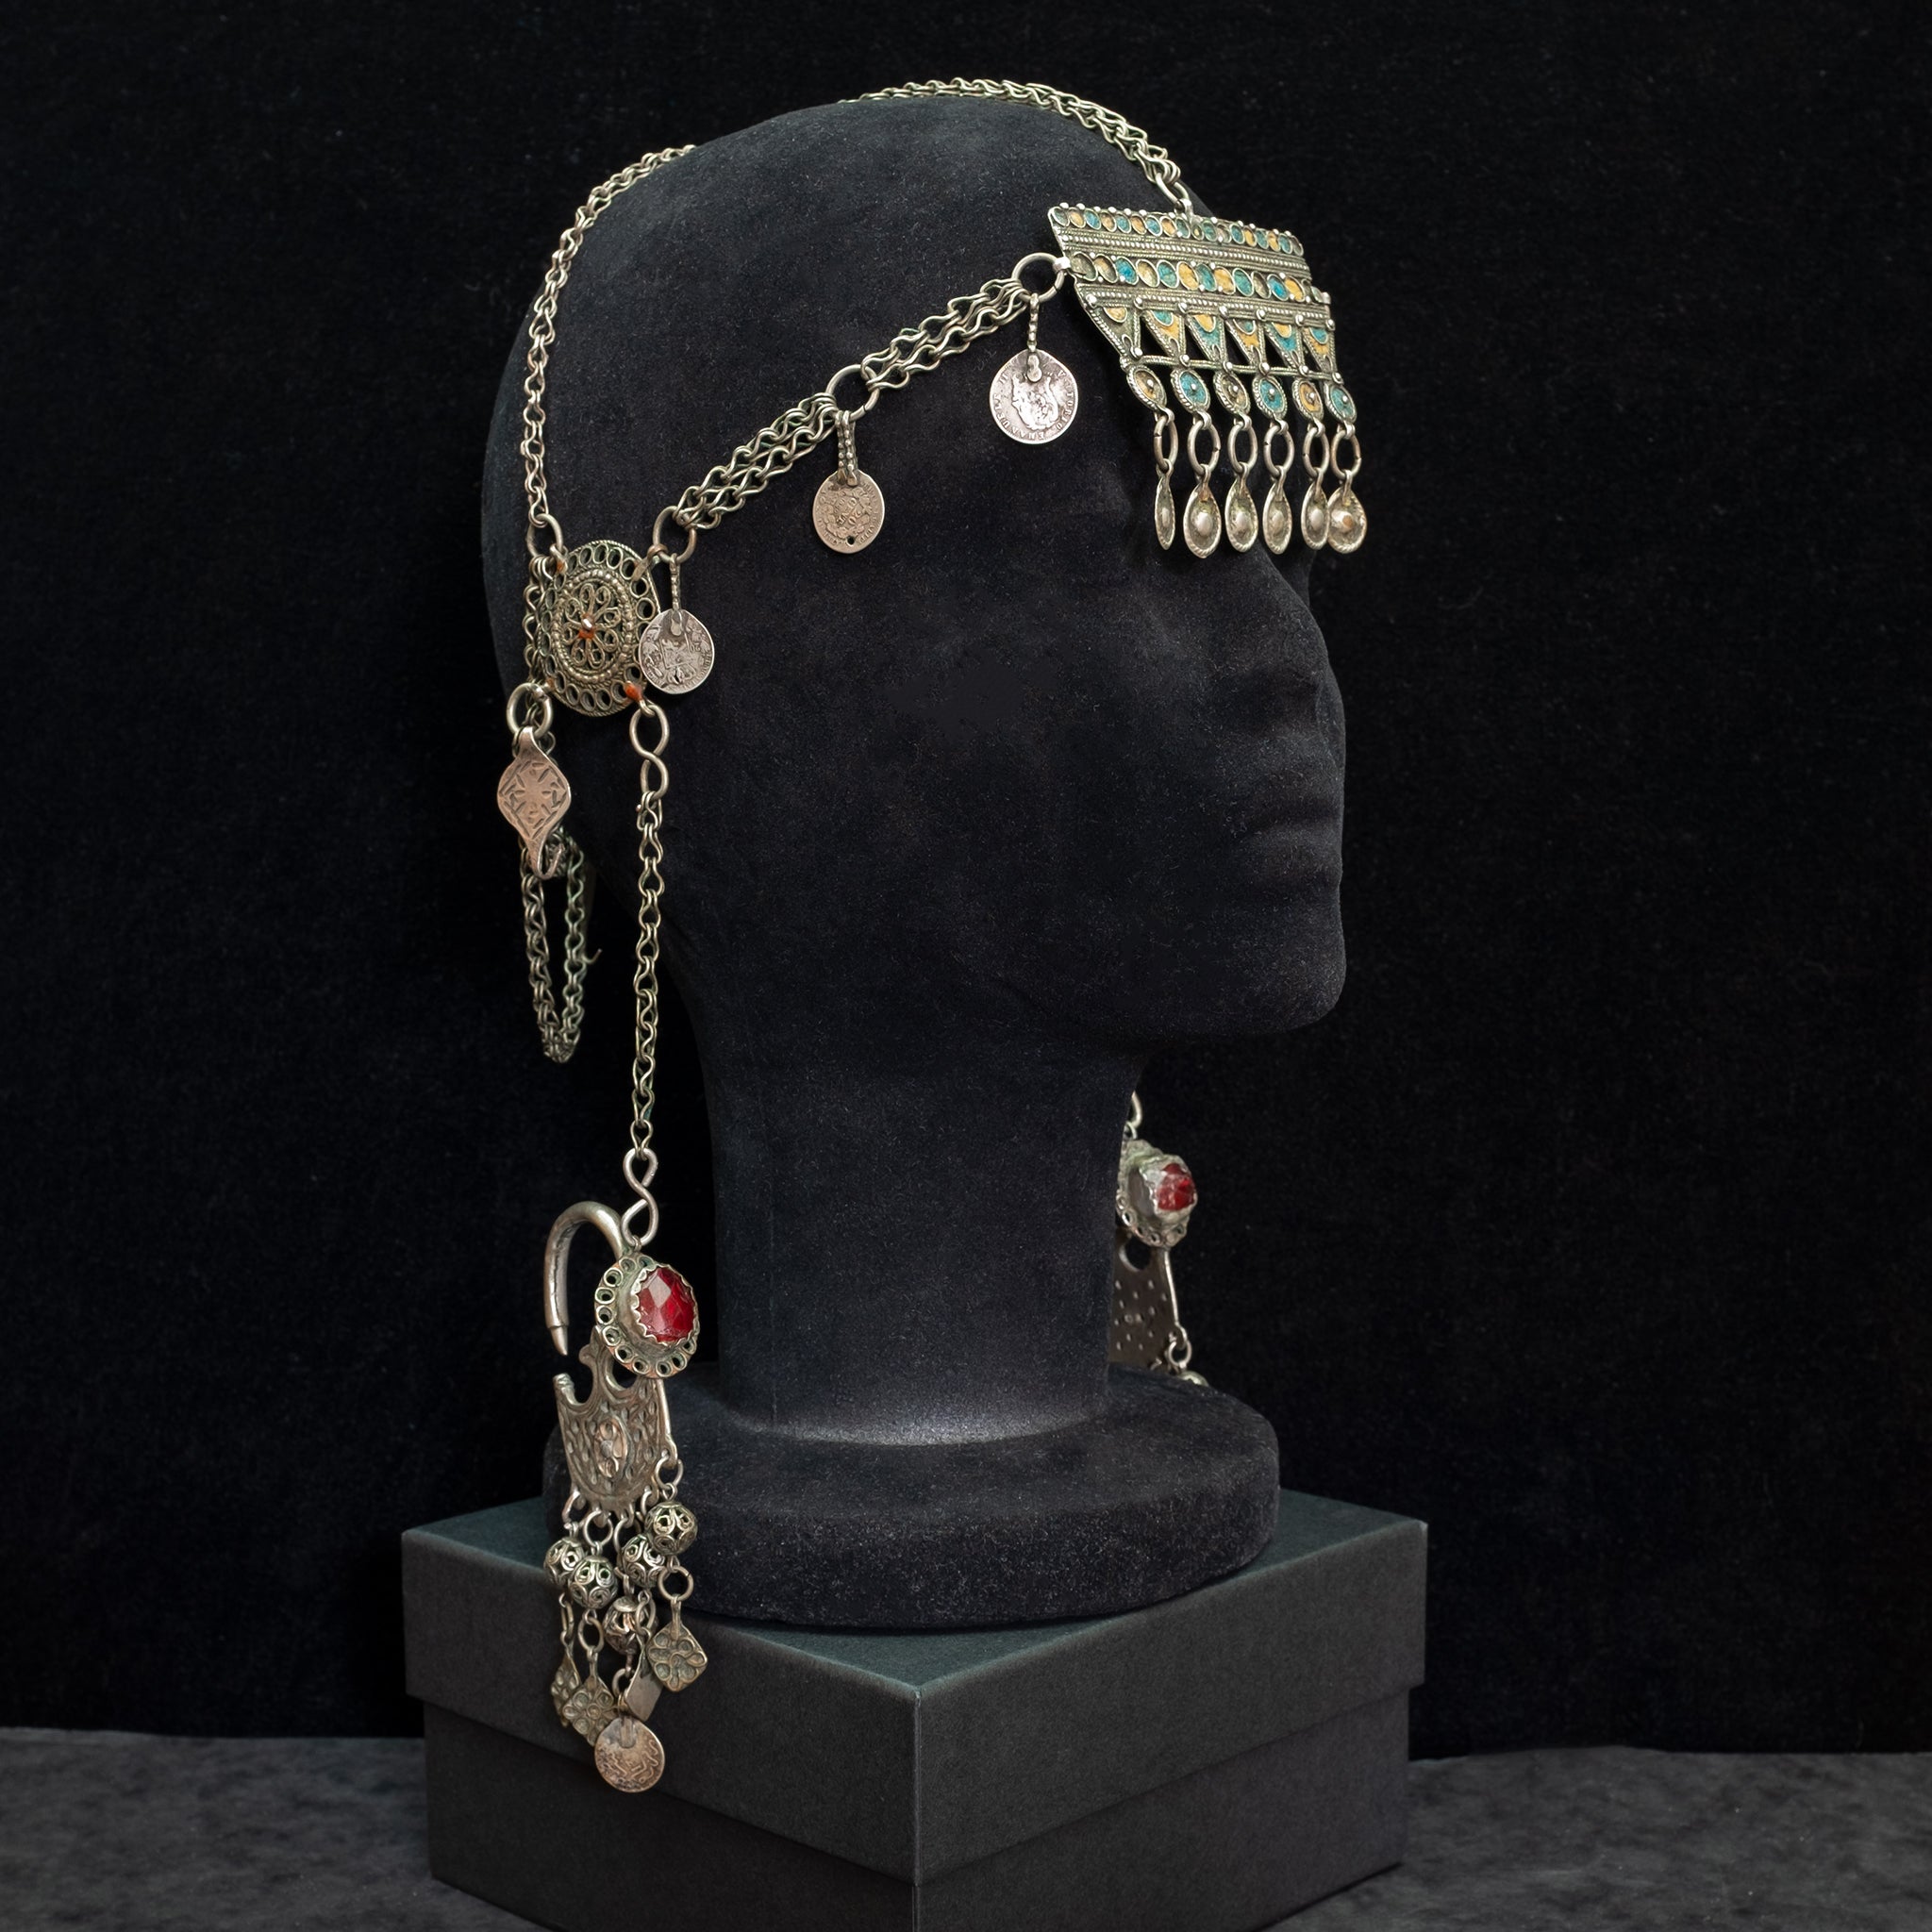 Antique Moroccan Silver & Enamel Headdress from Ighil N’Ogho, Taliouine – RARE